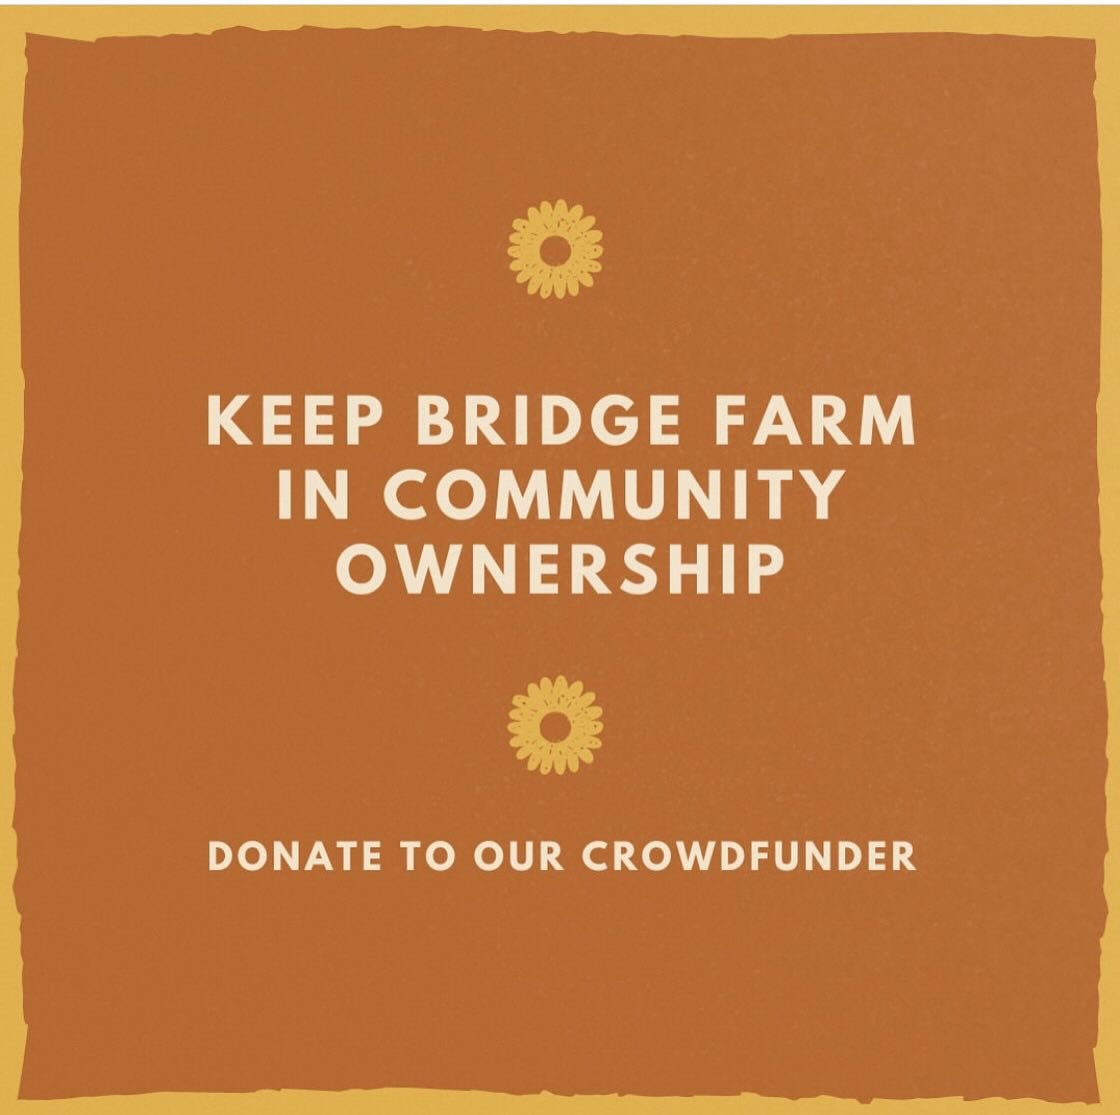 Please donate if you can! 

We are calling on our community for help! 
We need to ensure that the magic of Bridge Farm (the home of Bristol Tree Craft) stays alive and accessible to all. 

Help keep @bridgefarm_bristol  in community ownership. 

✨ Li